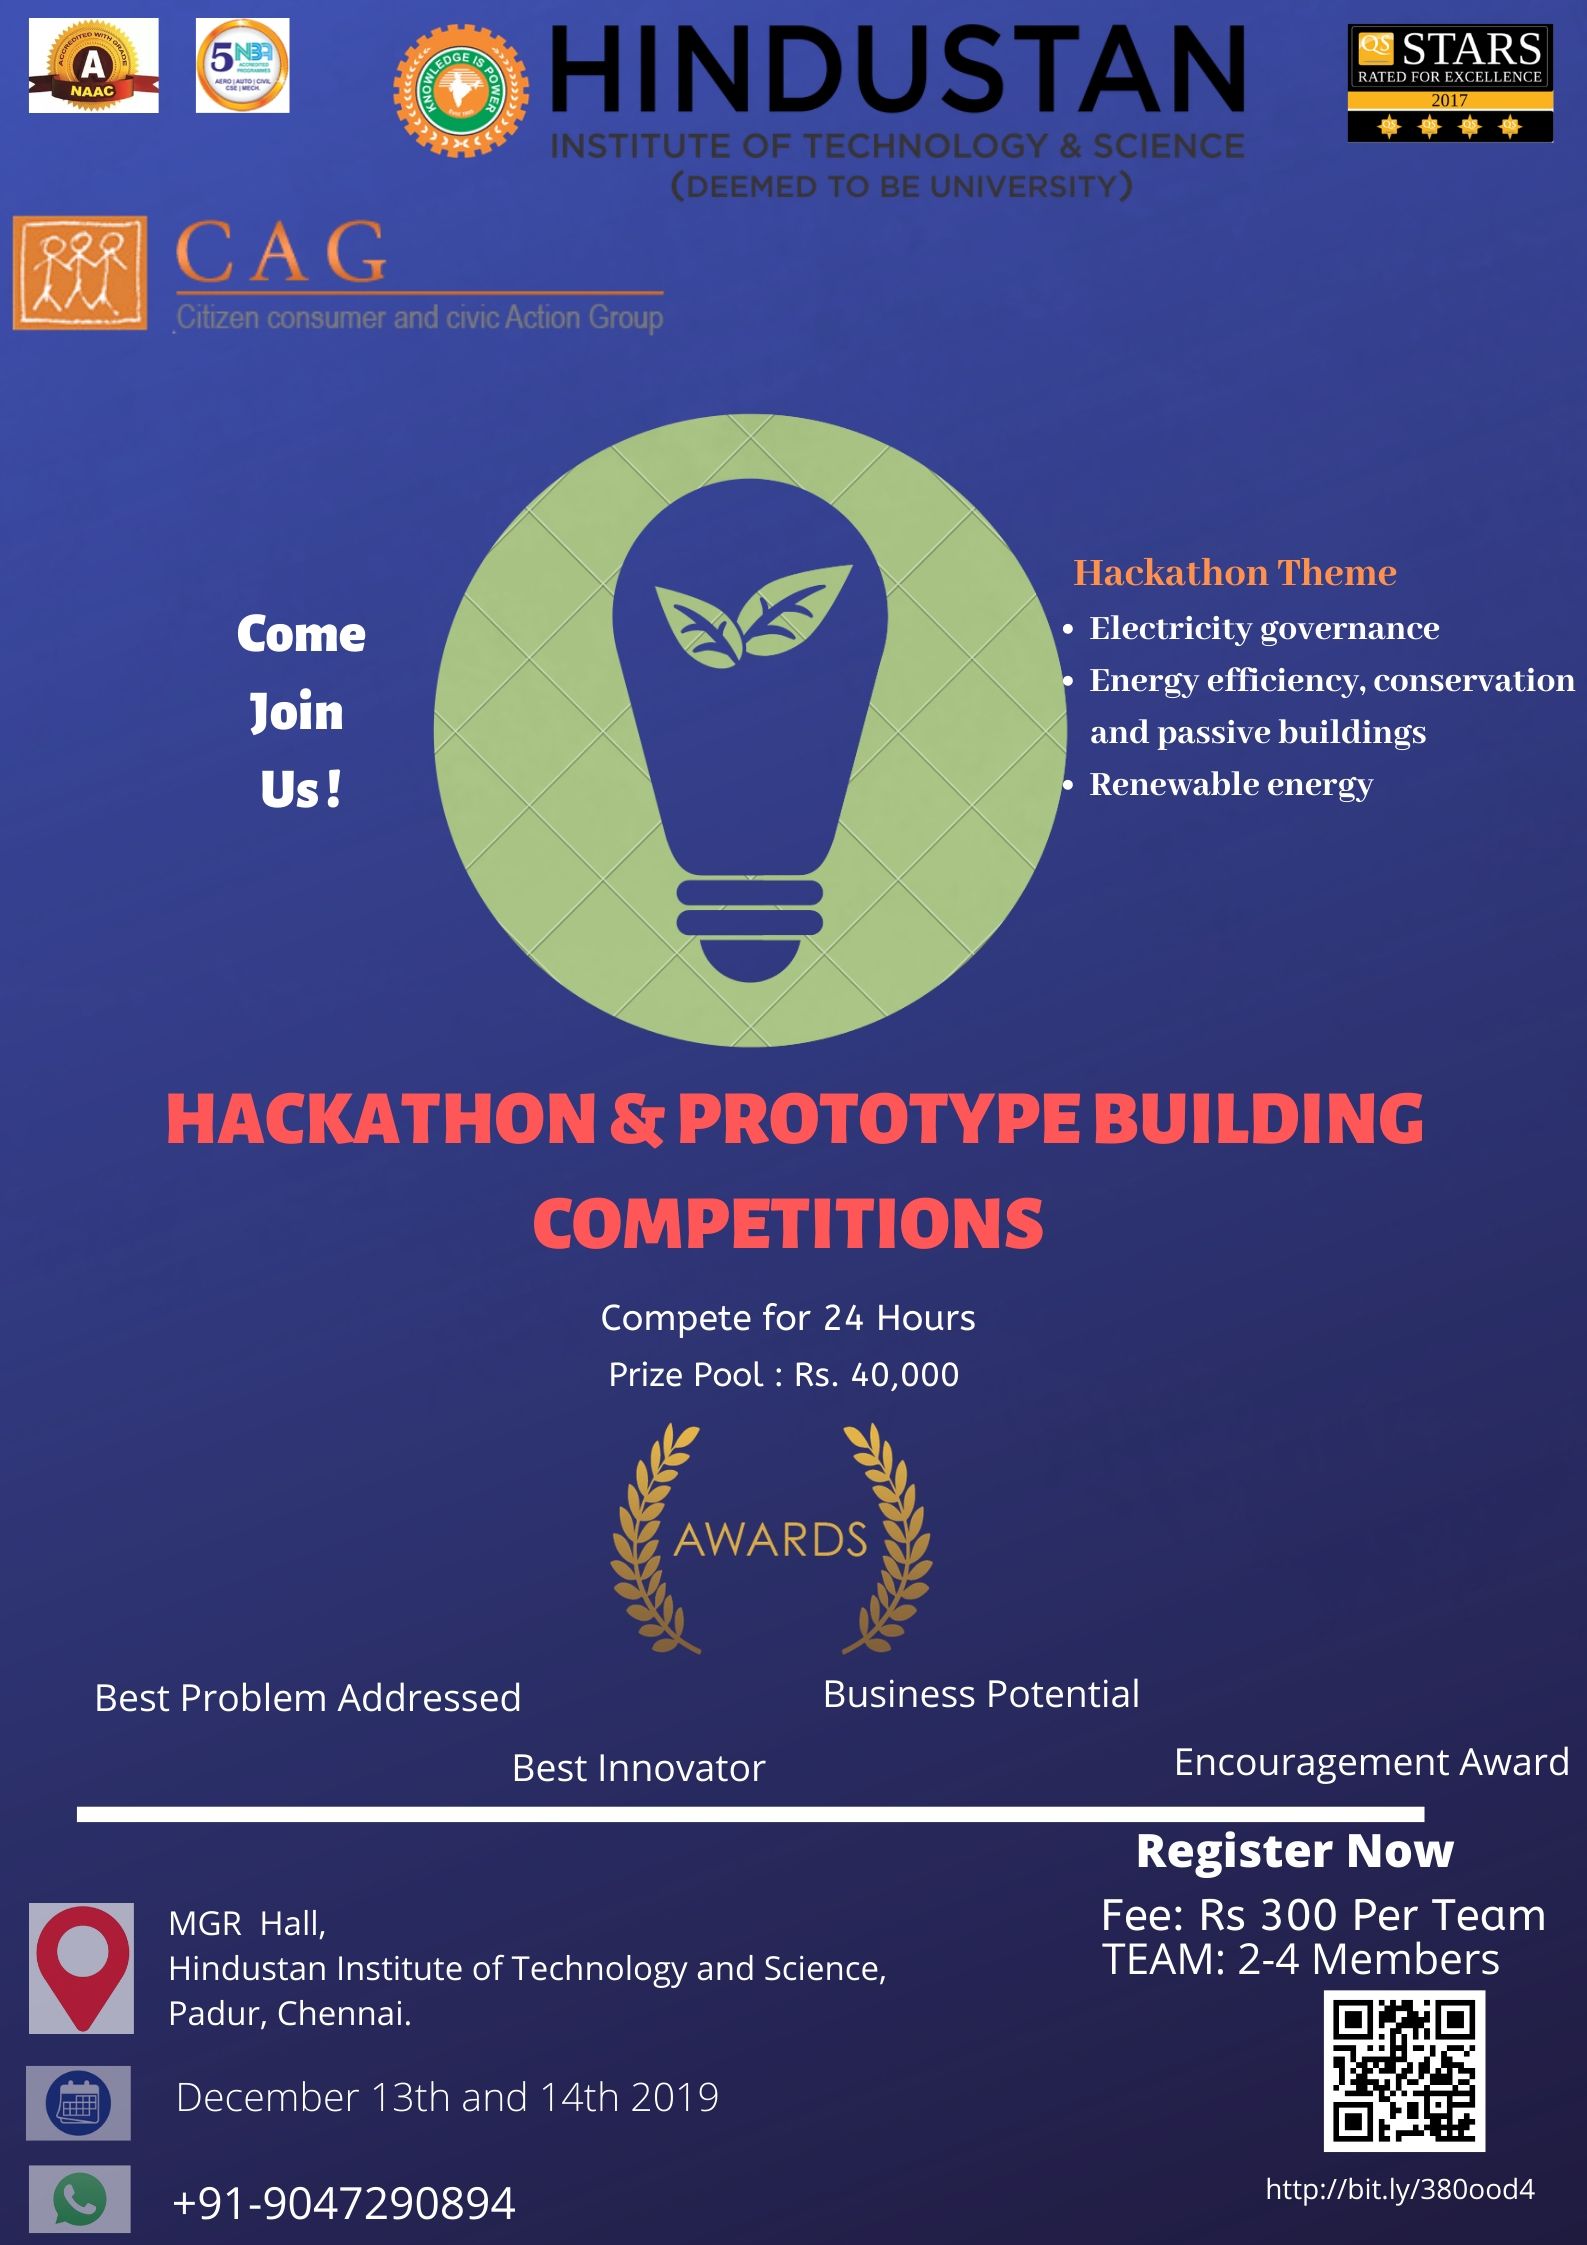 Hackathon and Prototype Building Competitions 2019